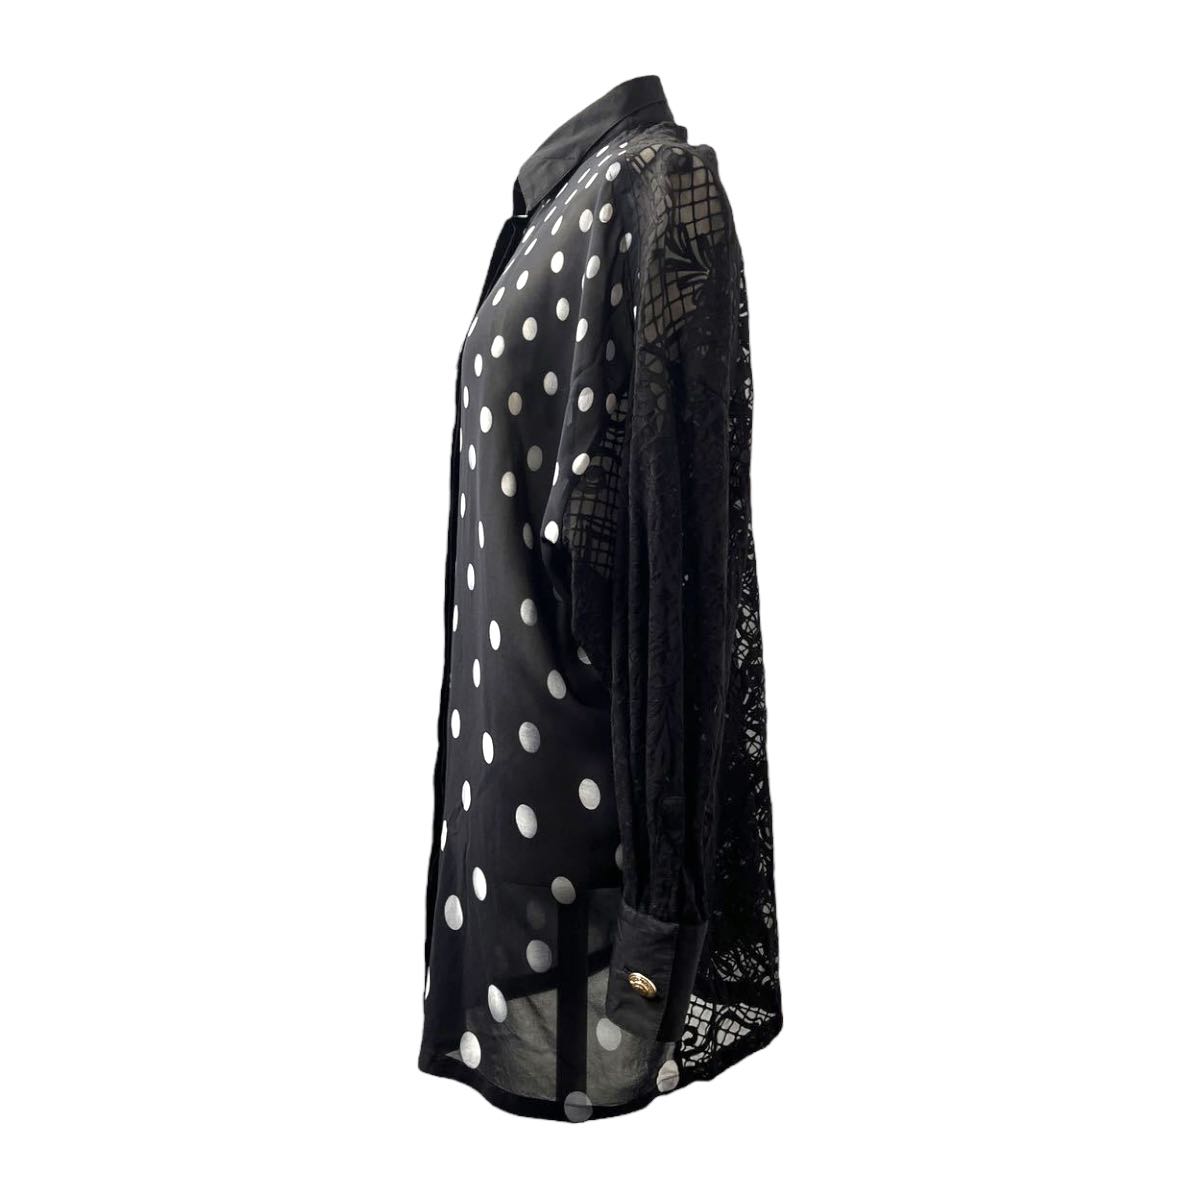 Vintage Gianni Versace Couture Sheer Polka Dot Button-Down Tunic with Burnout Lace Back and Sleeves - 3